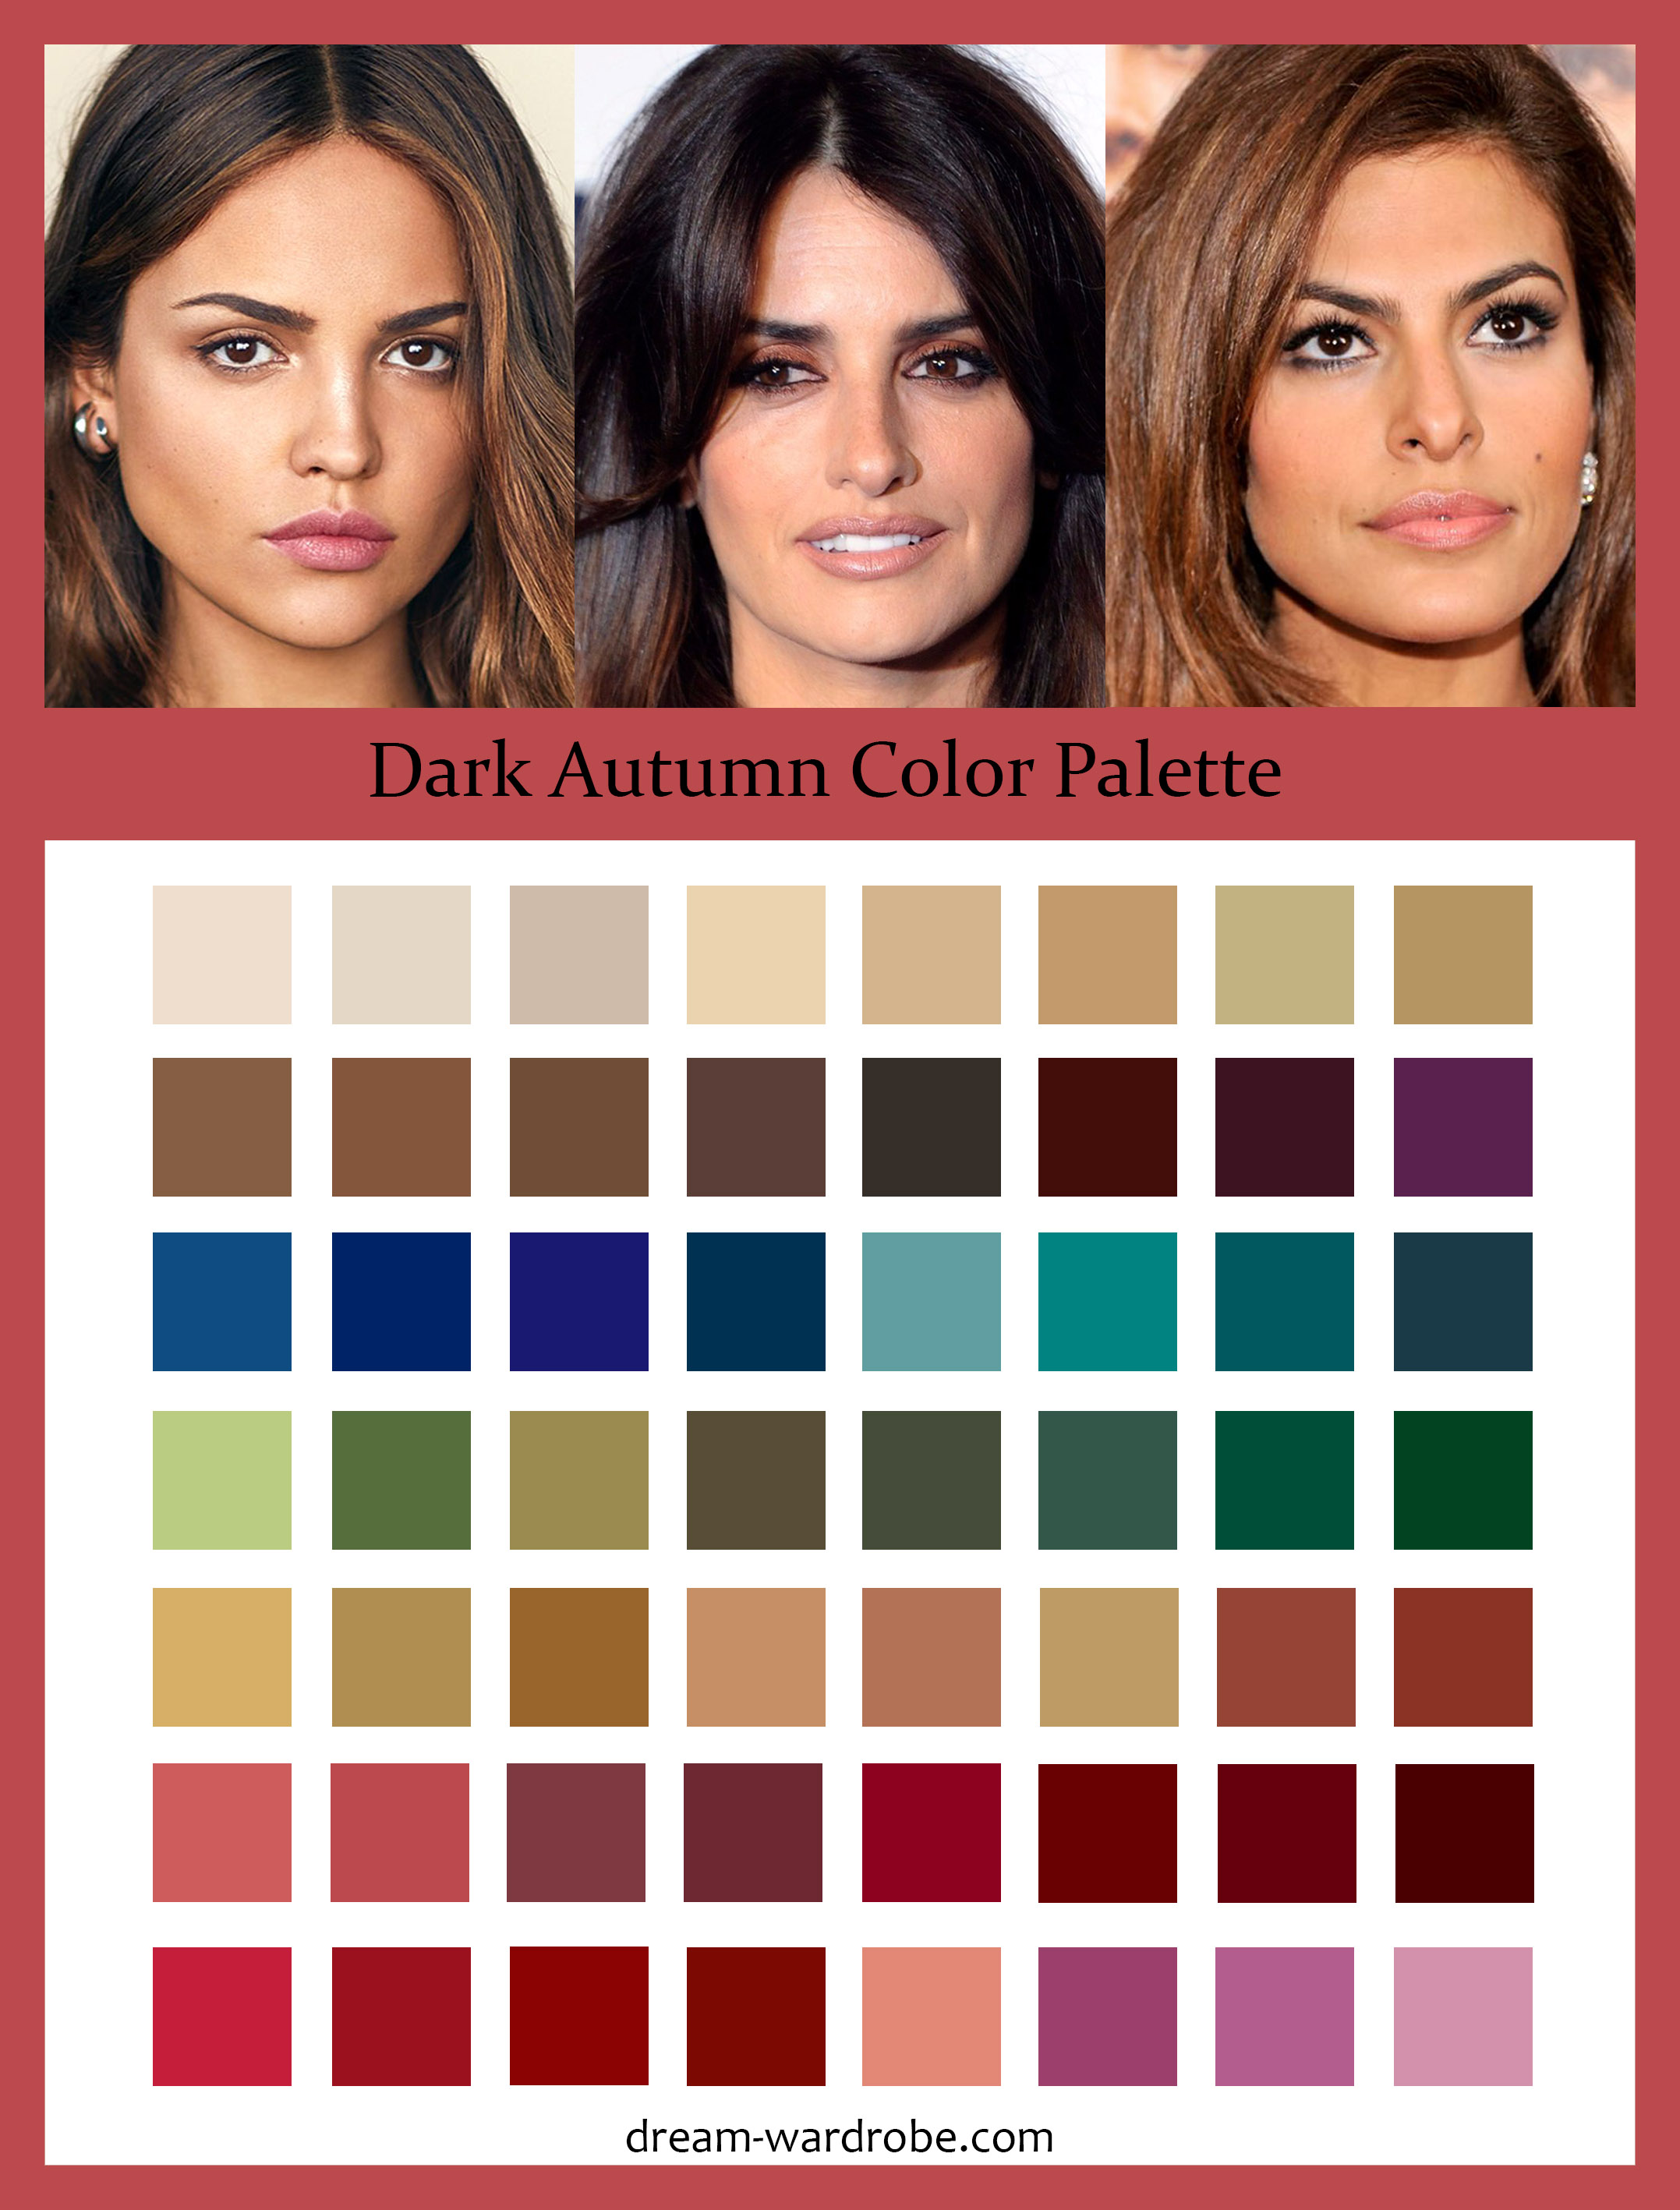 This easy and simple season color analysis for women will improve